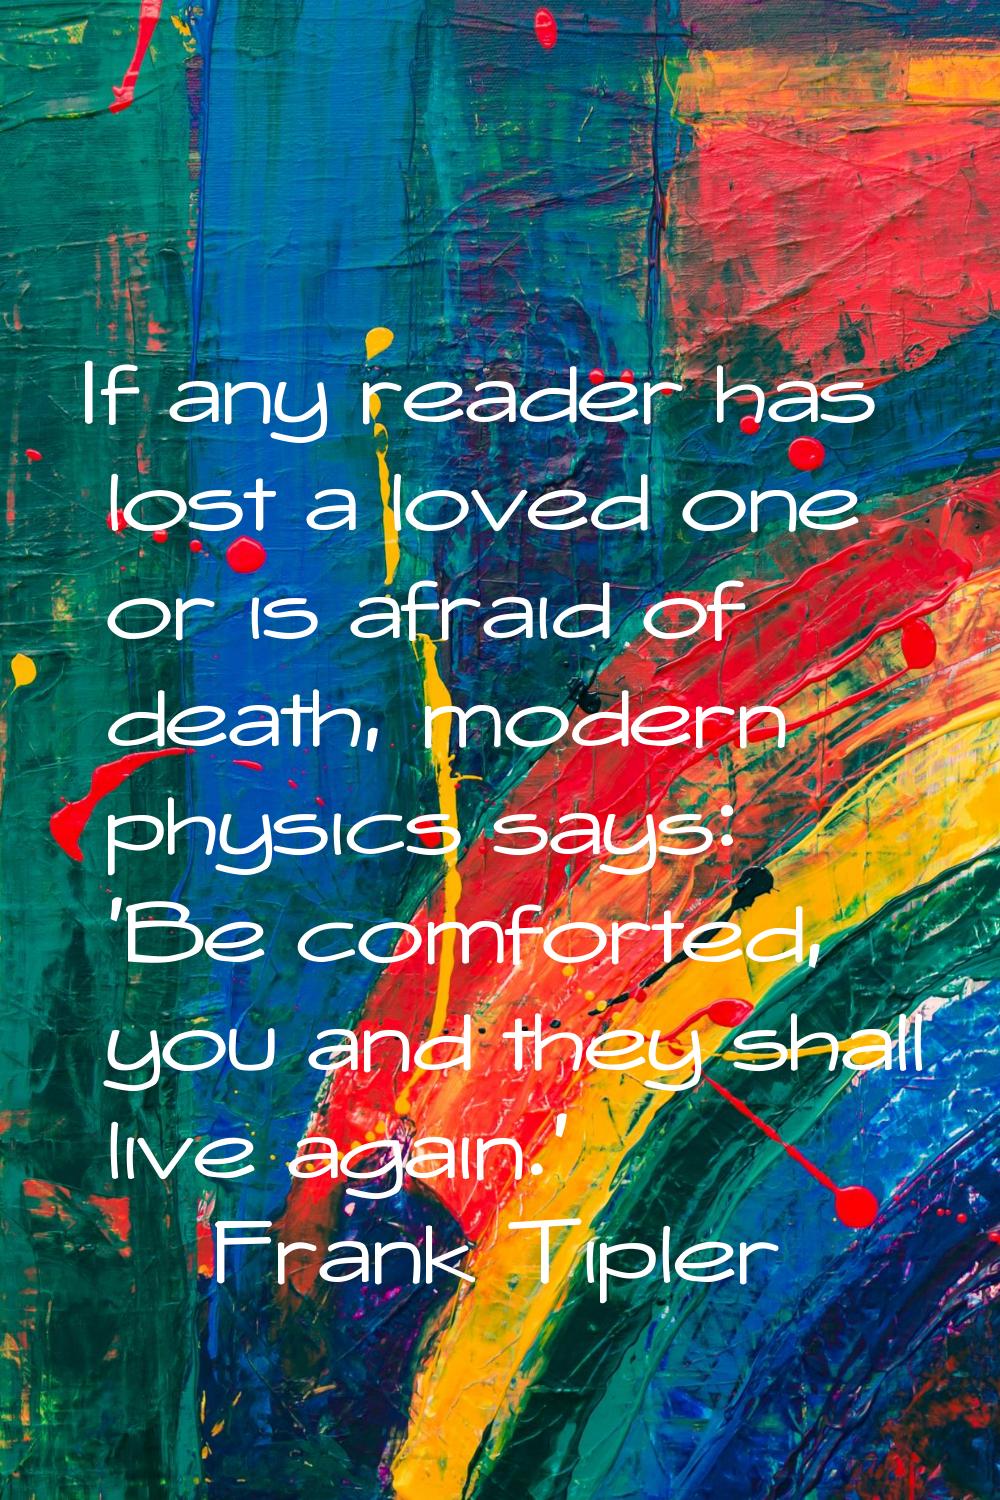 If any reader has lost a loved one or is afraid of death, modern physics says: 'Be comforted, you a